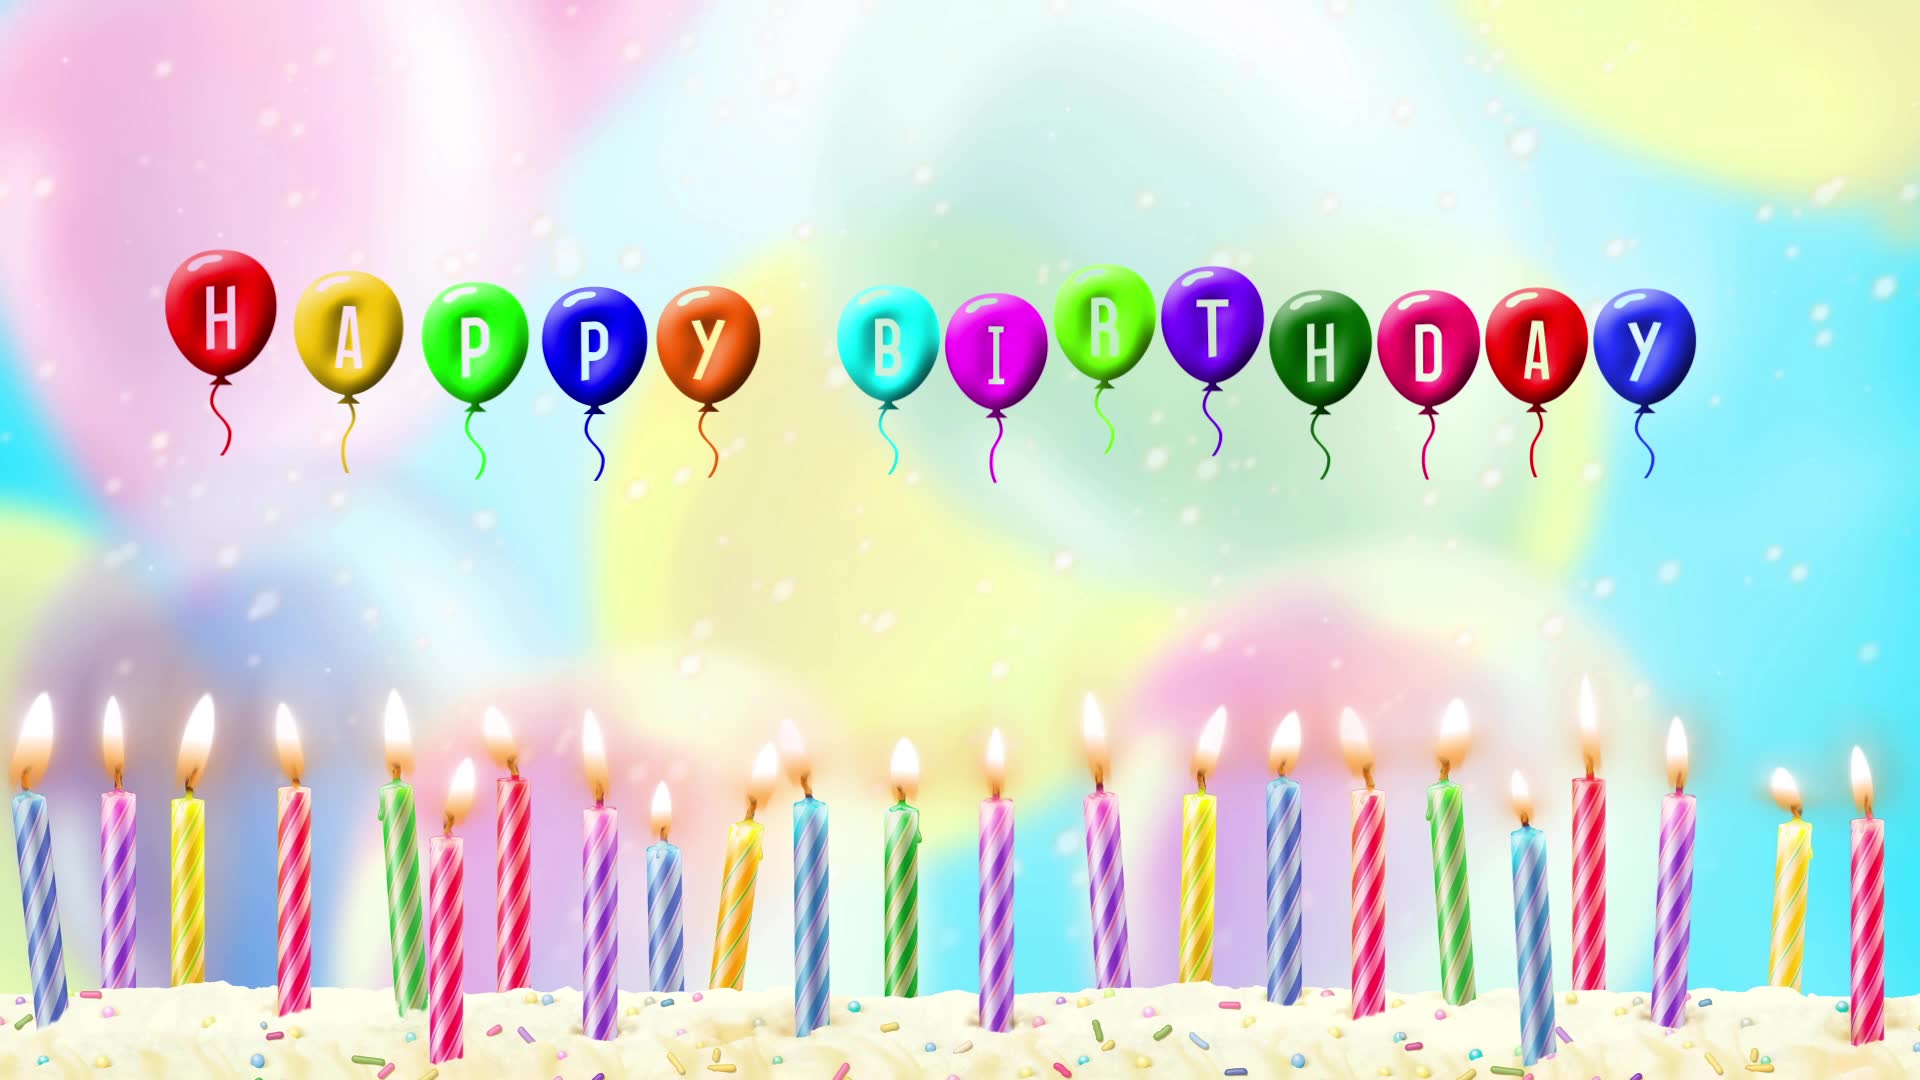  Daily Cards Happy Birthday Happy Birthday Balloons HD Images 1920x1080